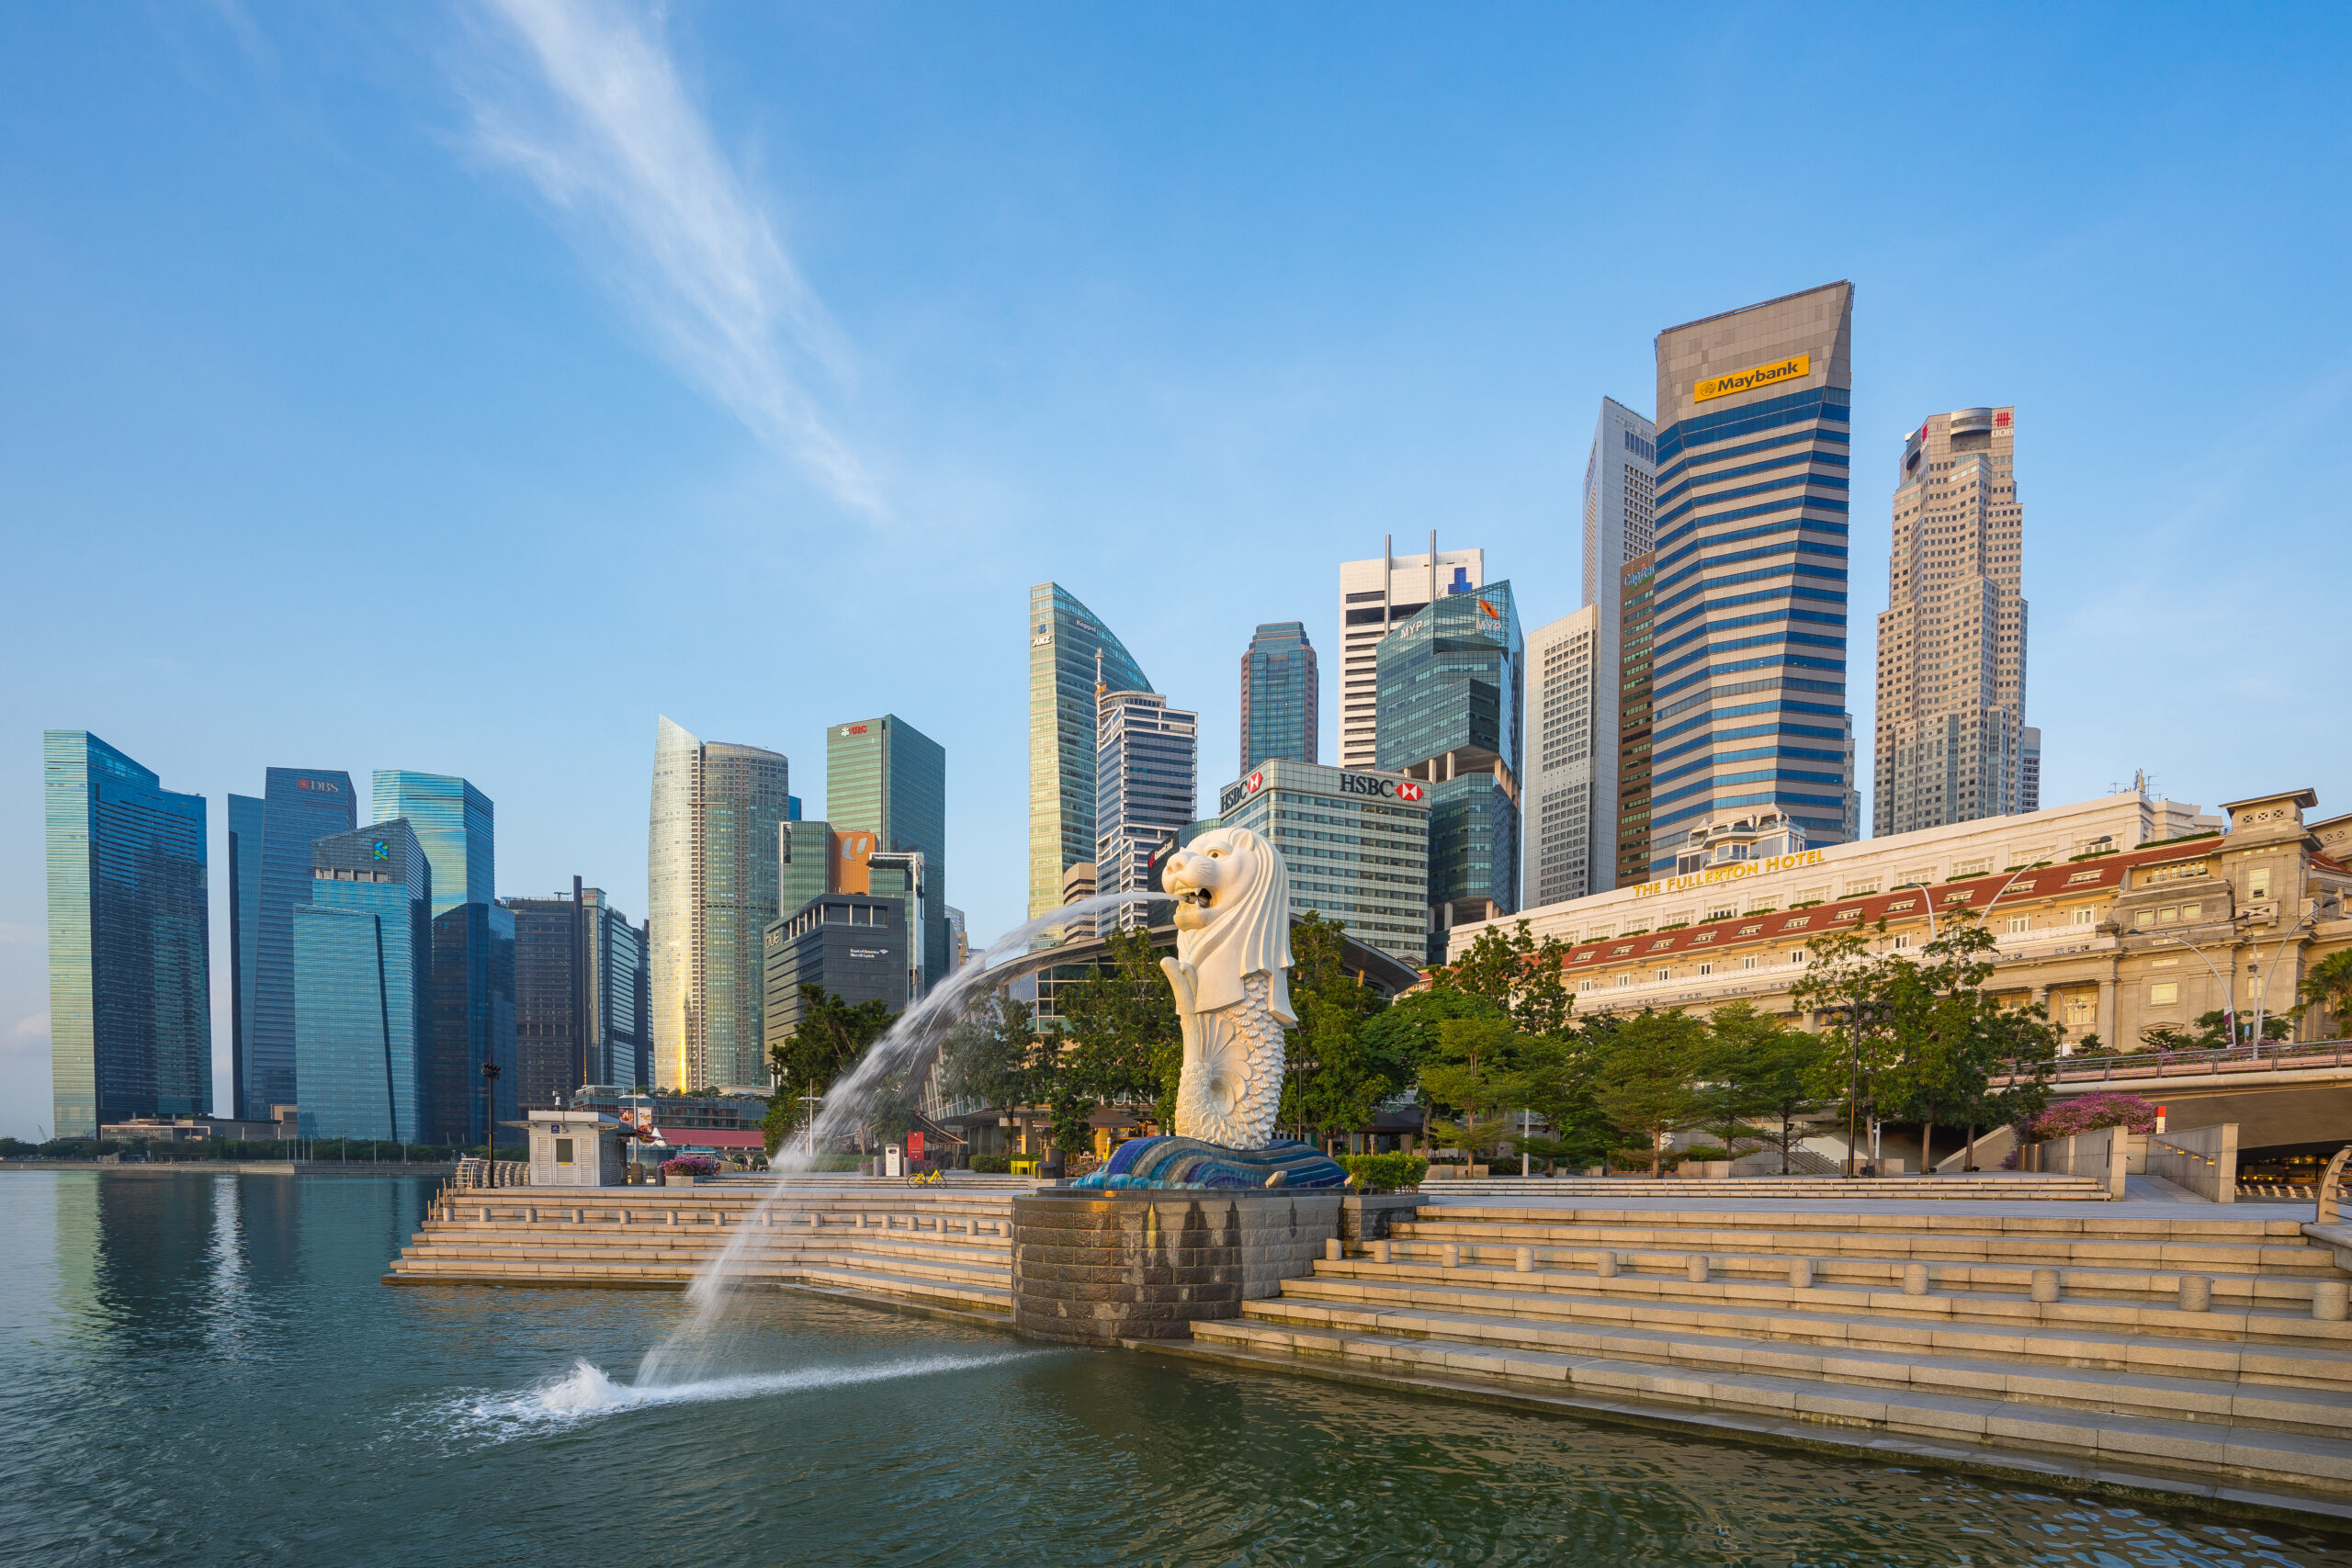 Singapore tax treatment of gains from sale of foreign assets